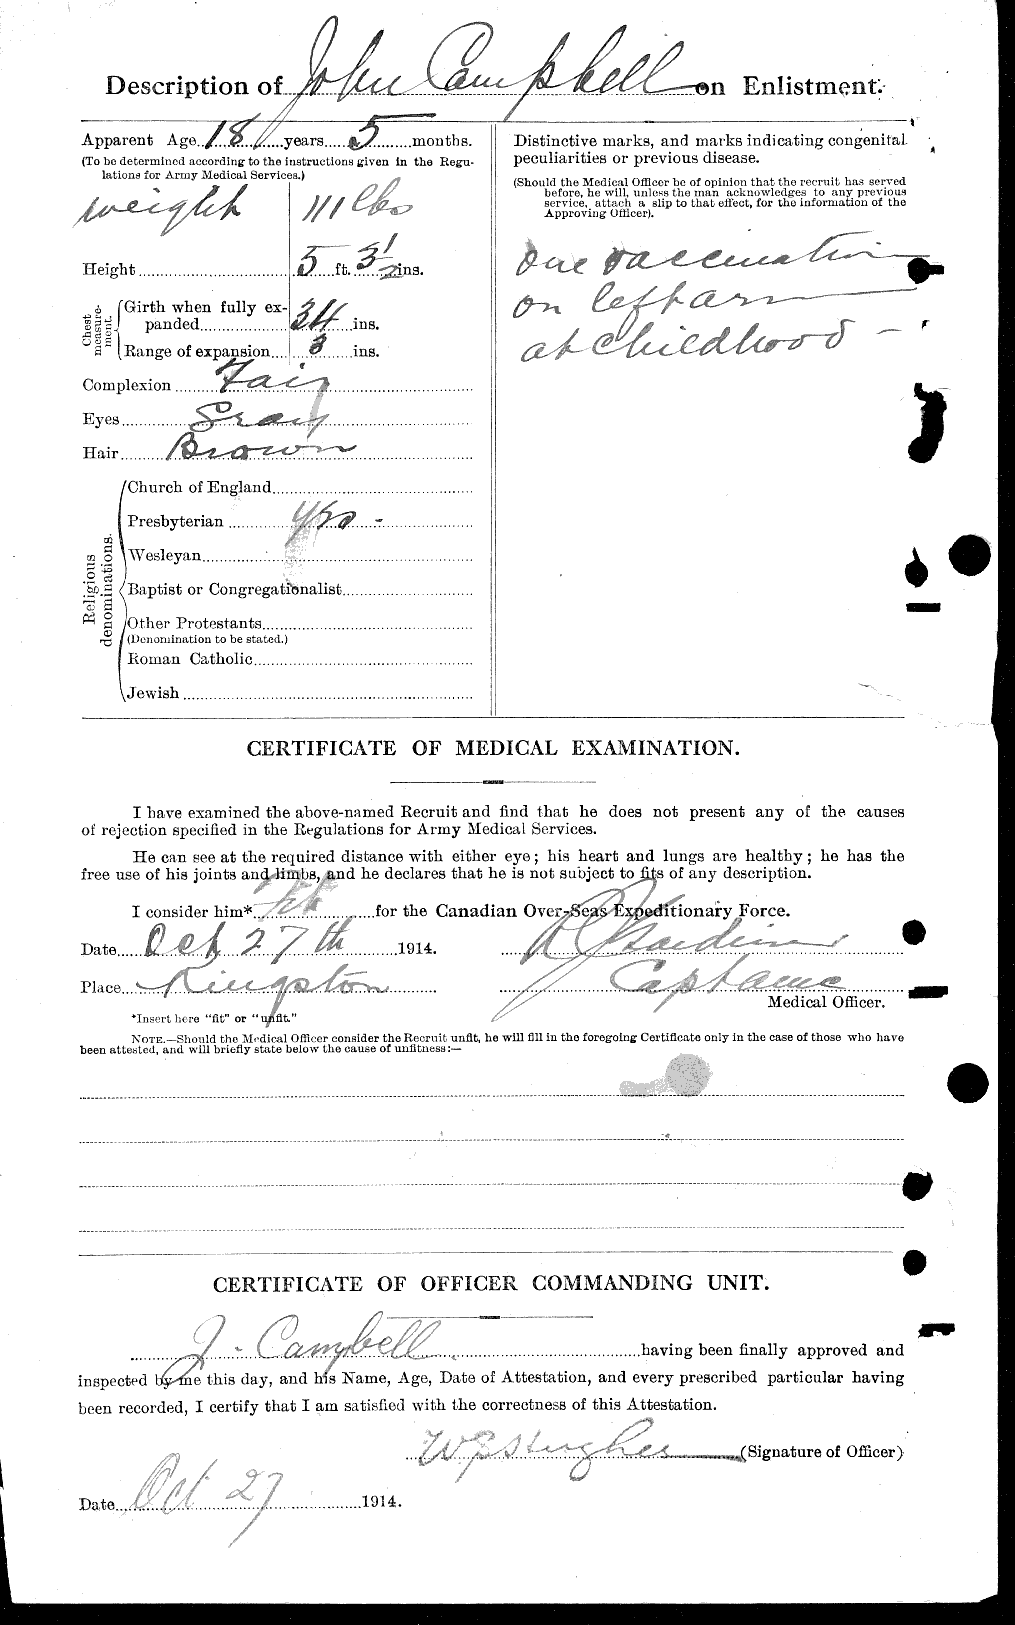 Personnel Records of the First World War - CEF 006803b